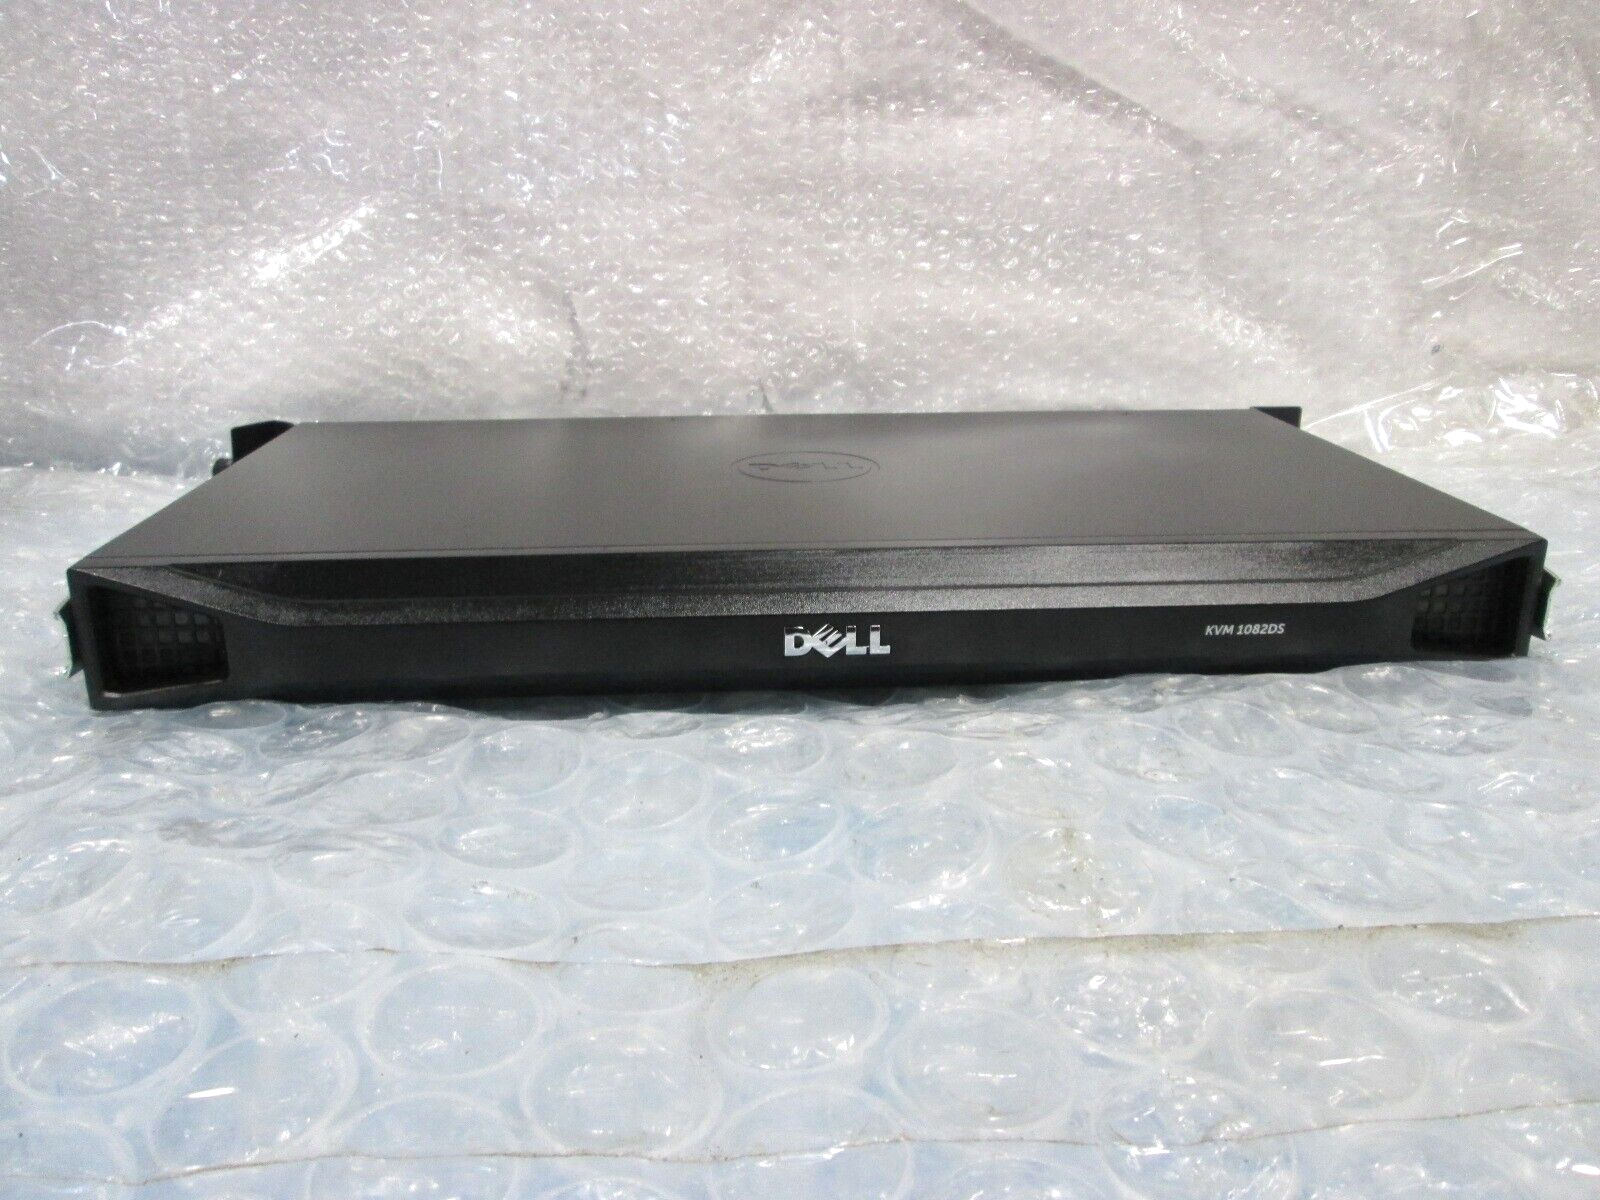 Dell KVM 1082DS 8 Port Remote Console Switch With Power Cord.